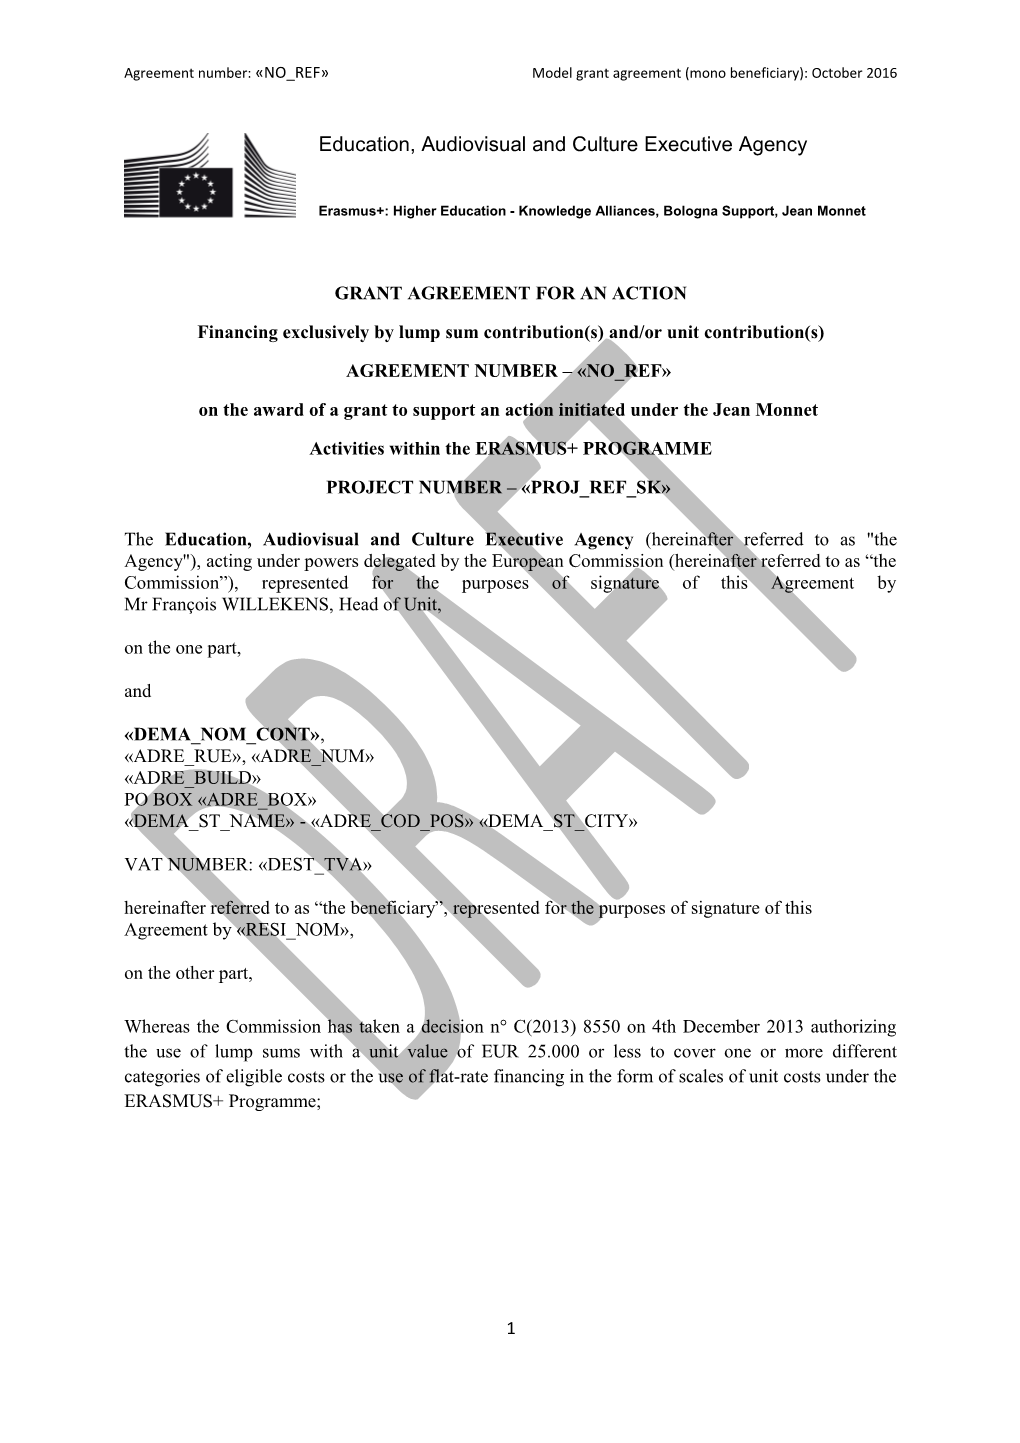 Grant Agreement for an Action